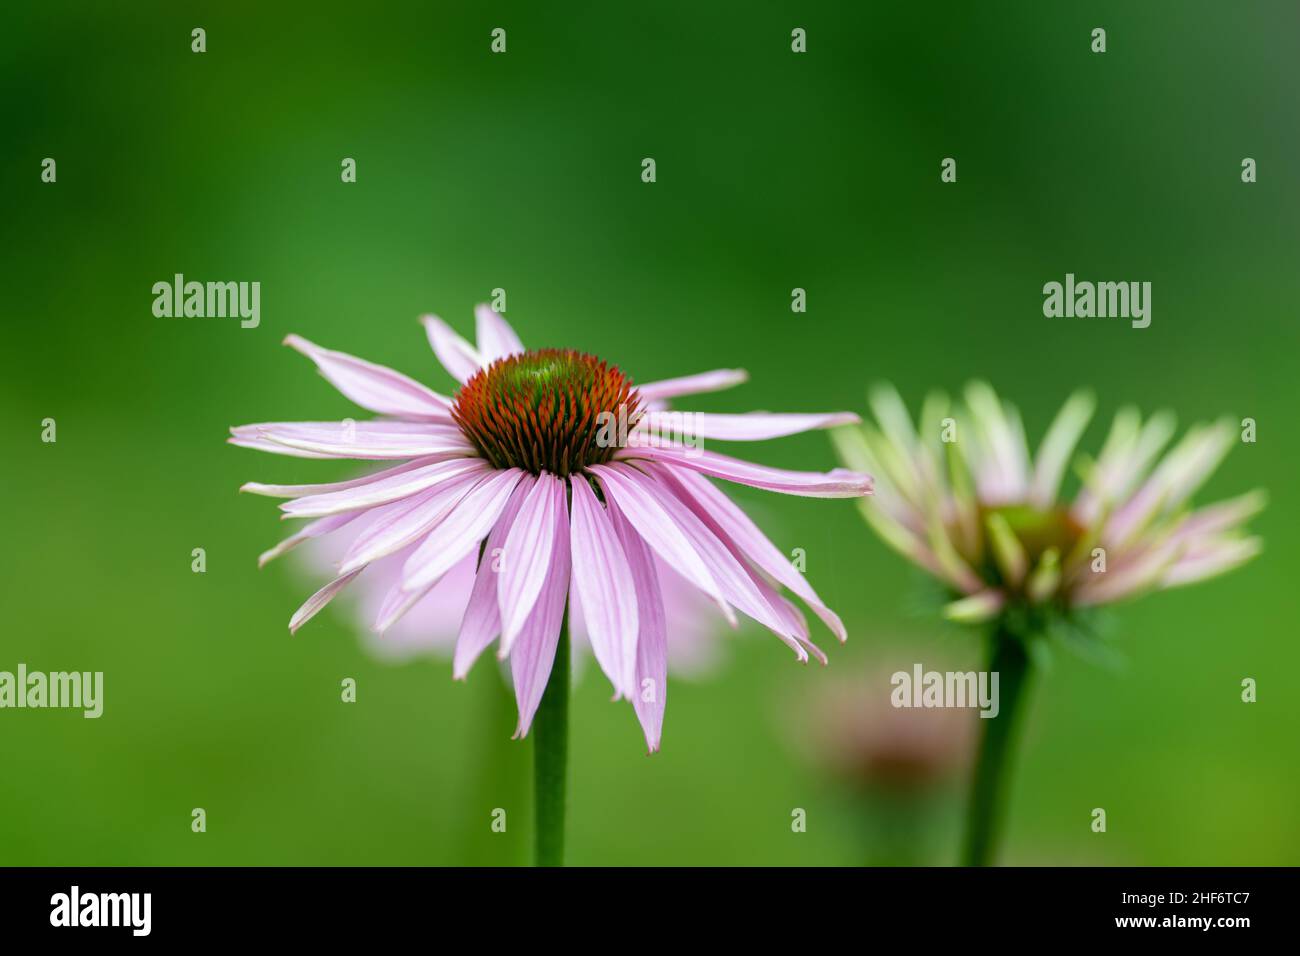 Multiple single pale purple echinacea coneflowers with a long green stem and a vibrant green background. The coneflower bloom is a perennial. Stock Photo